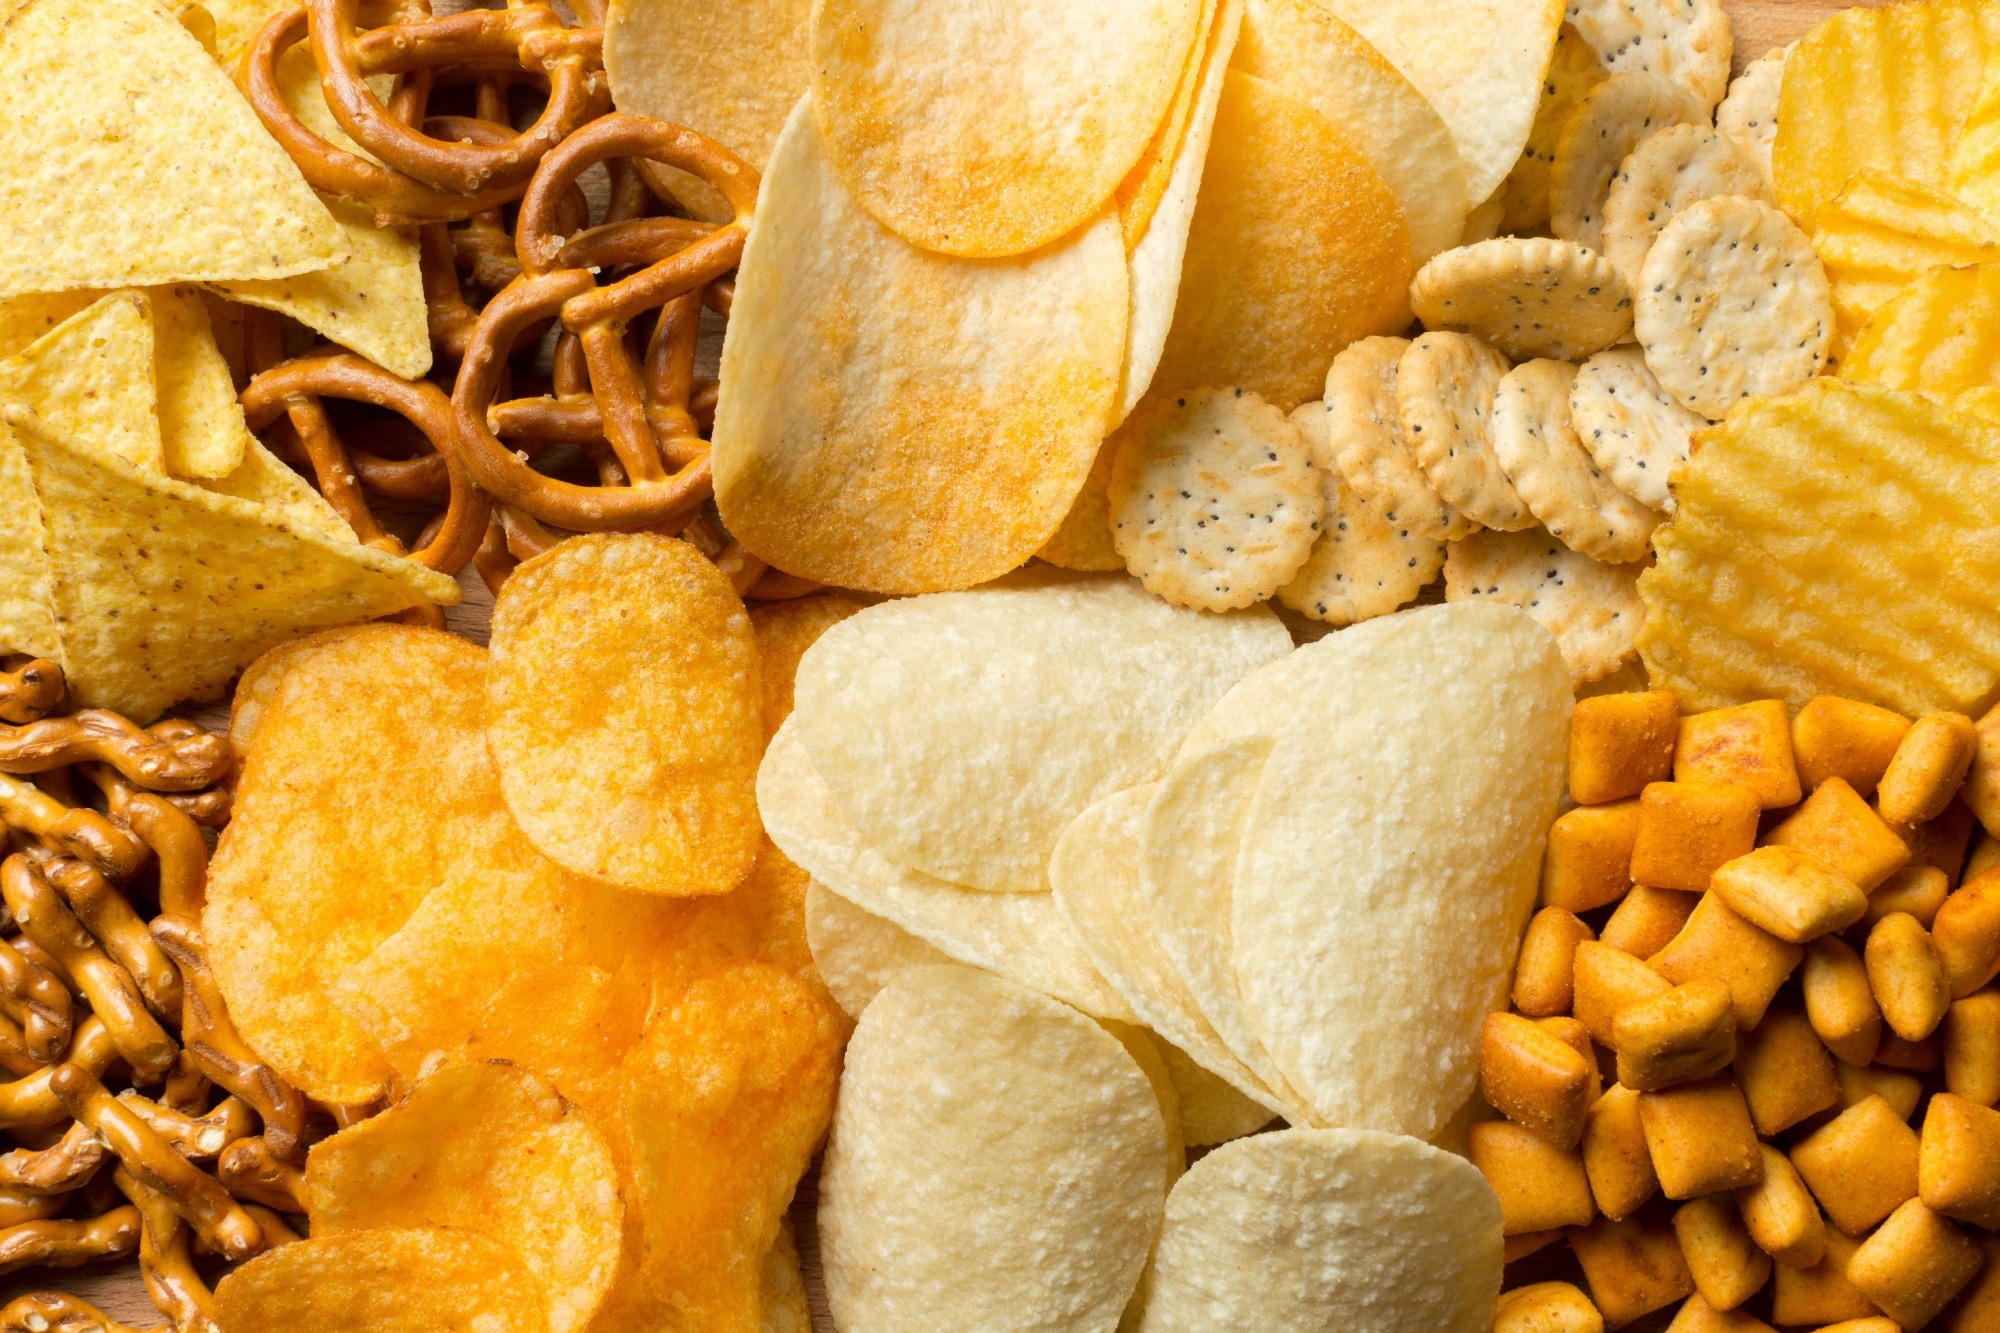 Study: Ultra-processed food exposure and adverse health outcomes: umbrella review of epidemiological meta-analyses. Image Credit: FabrikaSimf/Shutterstock.com